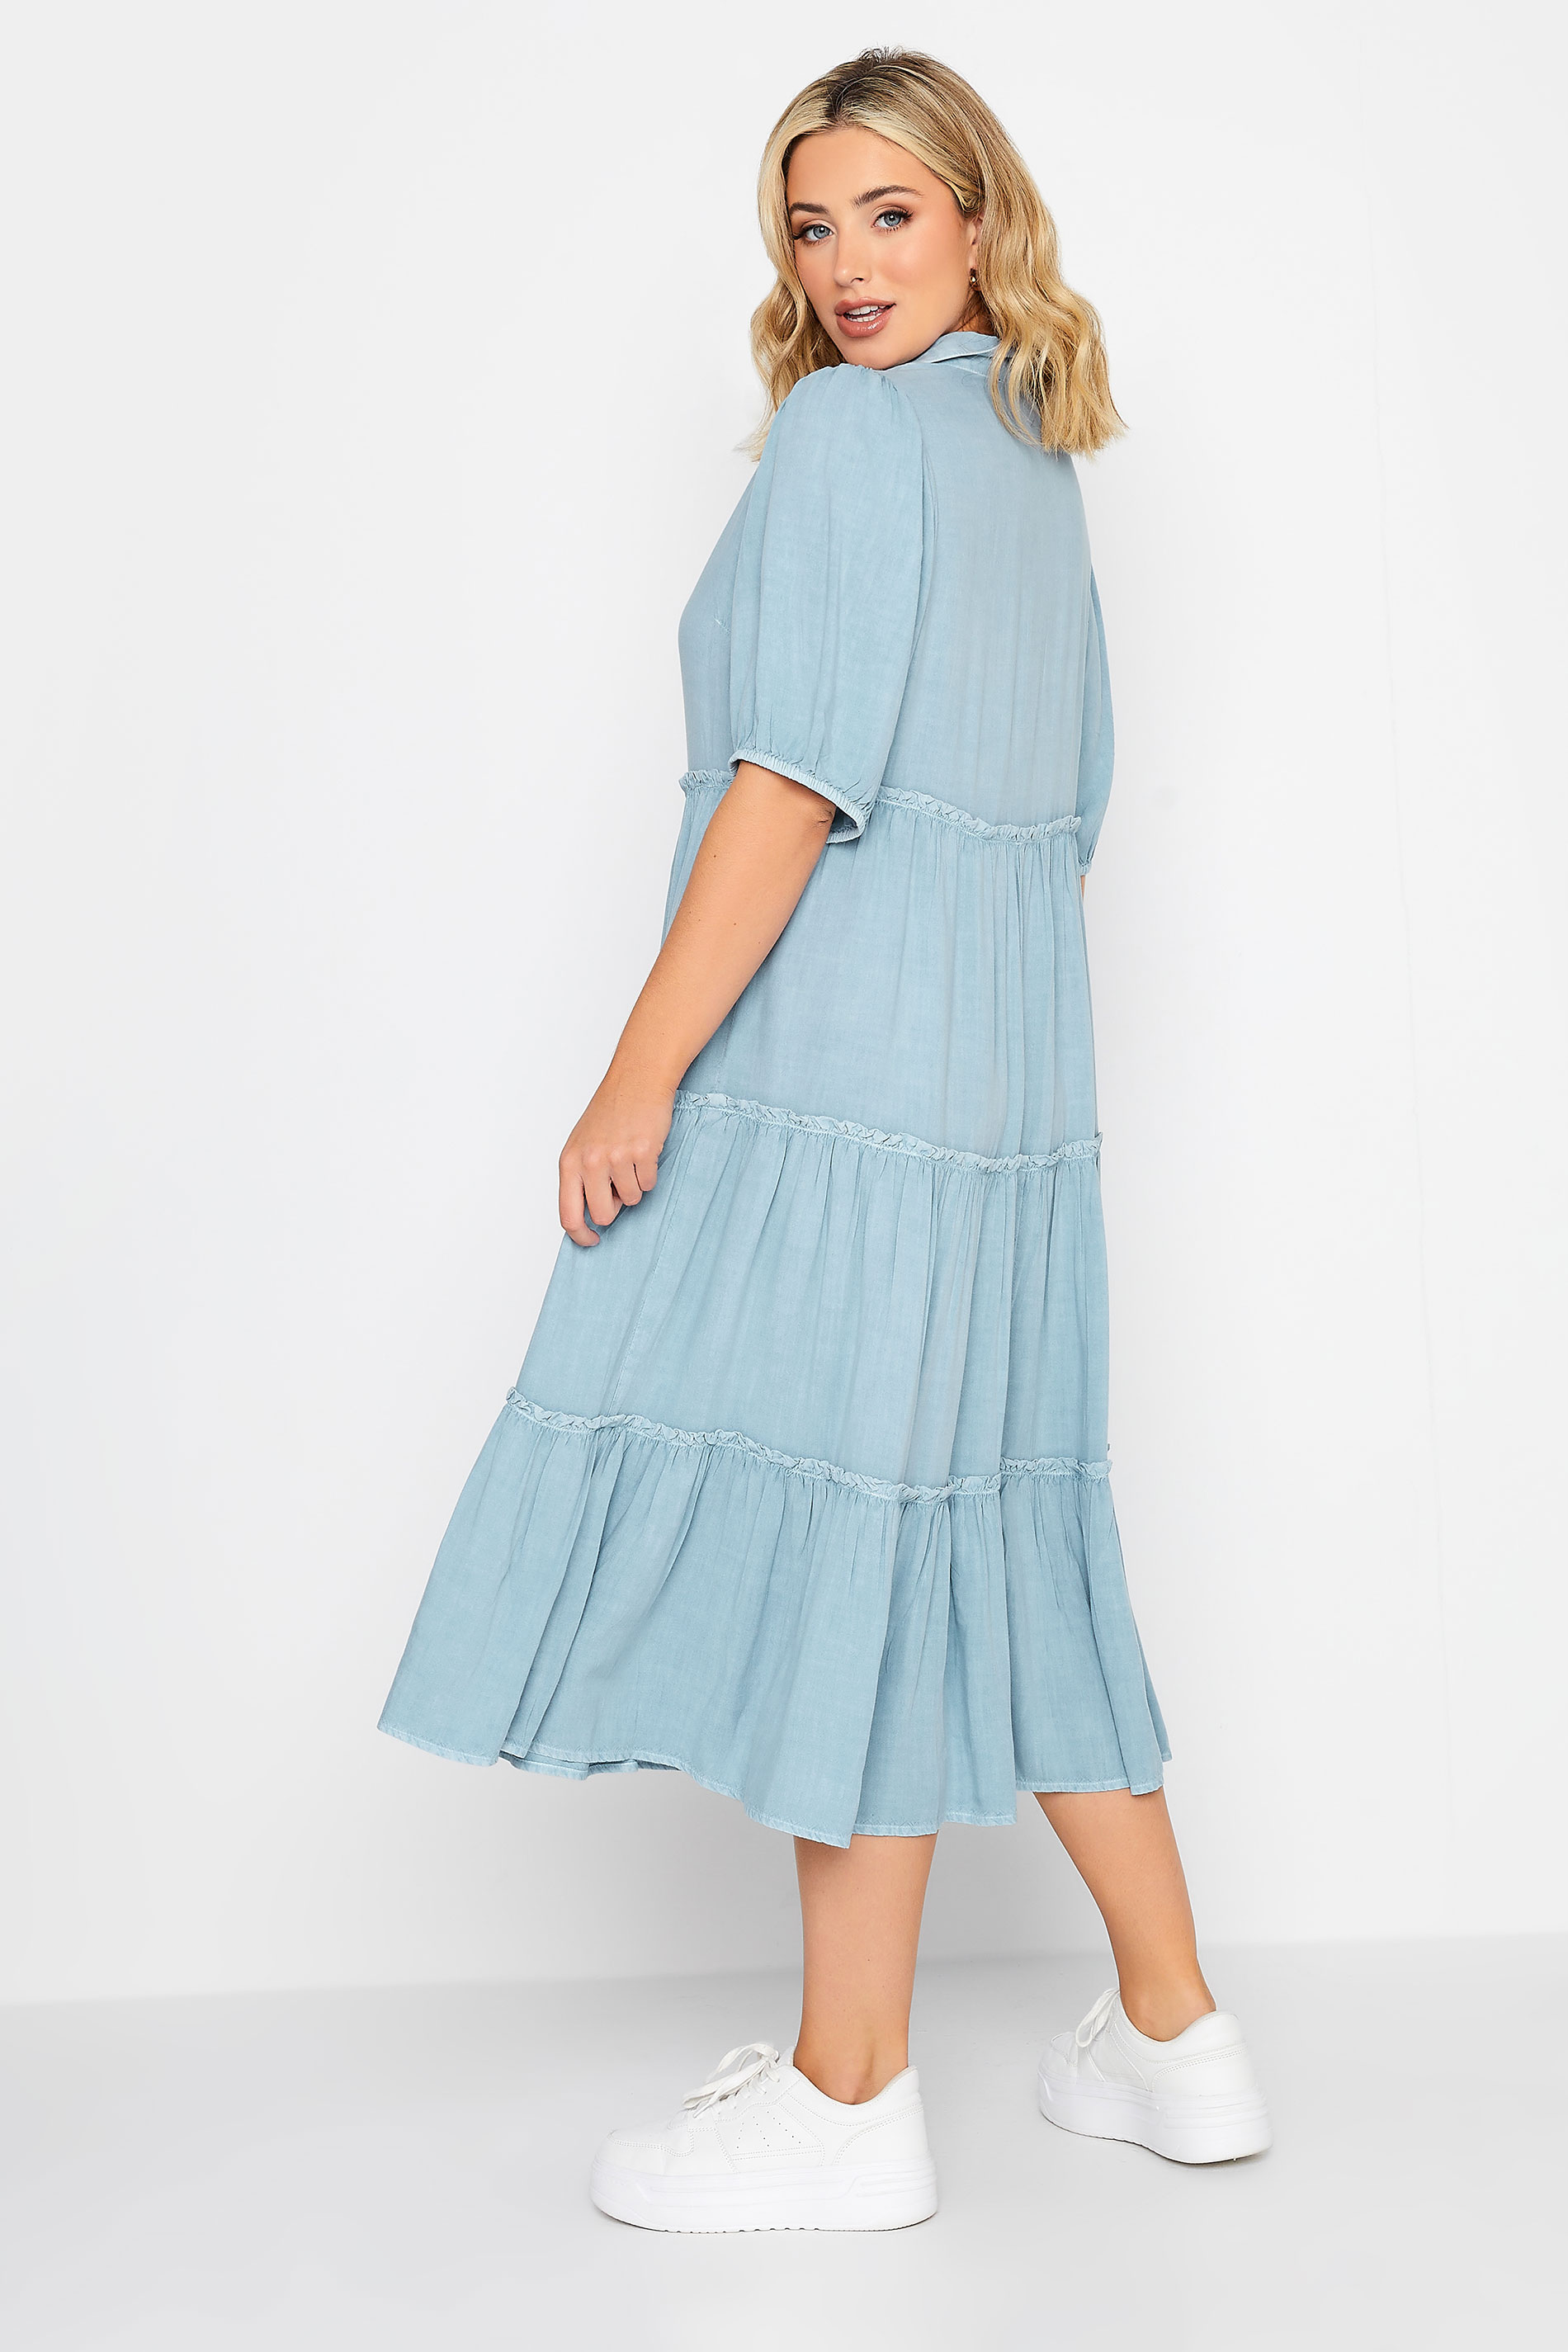 Women Plus Size Denim Dress Spring Casual Long Sleeve Turn Down Neck  Pockets Midi Dress Ladies Sashes Button Solid Dresses Robe From  Lovemakeups, $55.67 | DHgate.Com